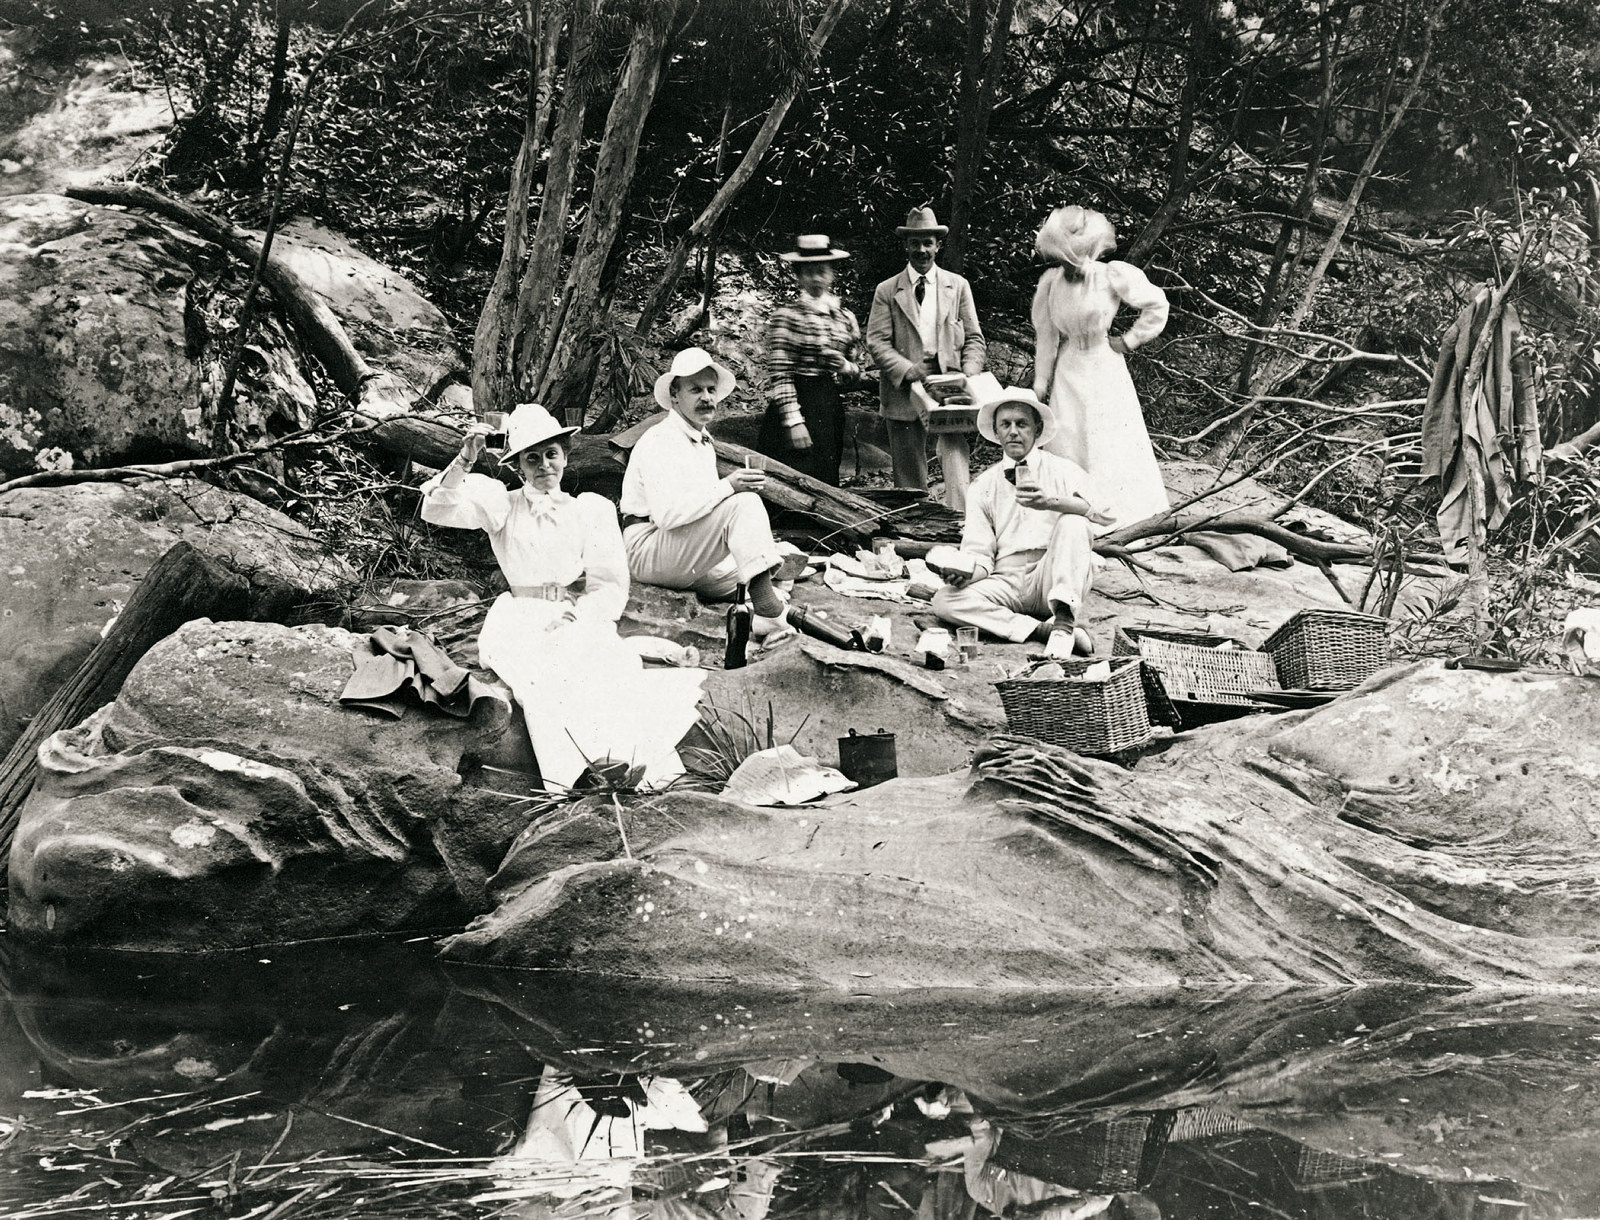 Group of people sit on rocks beside a quite stream after a picnic